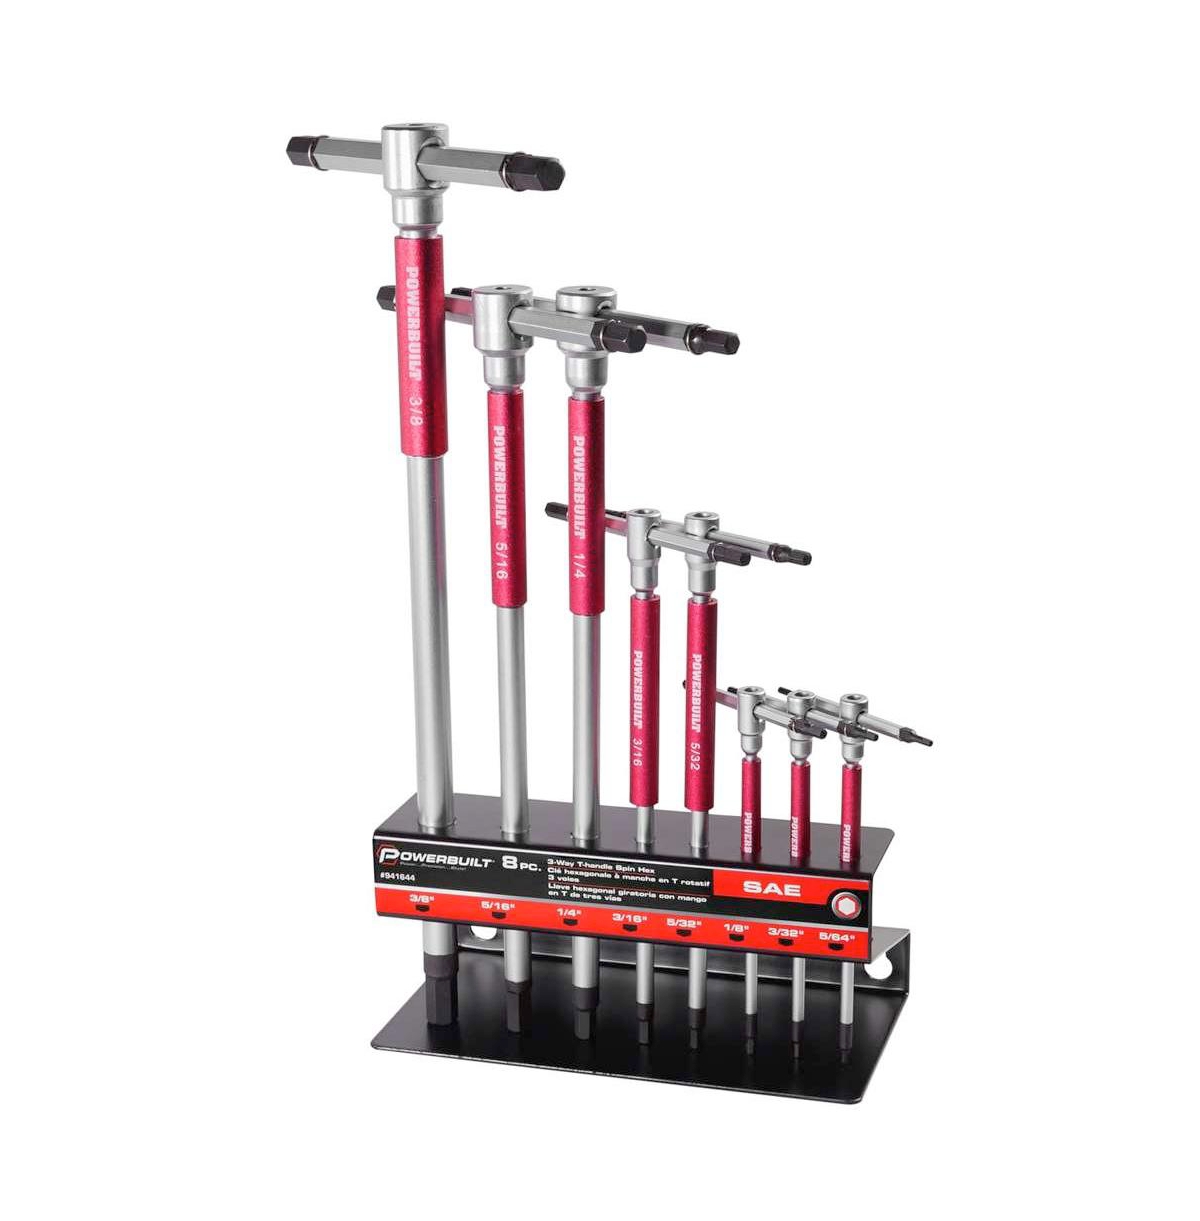 8 Piece Sae T-Handle Hex Key Wrench Set with Storage Rack - Red